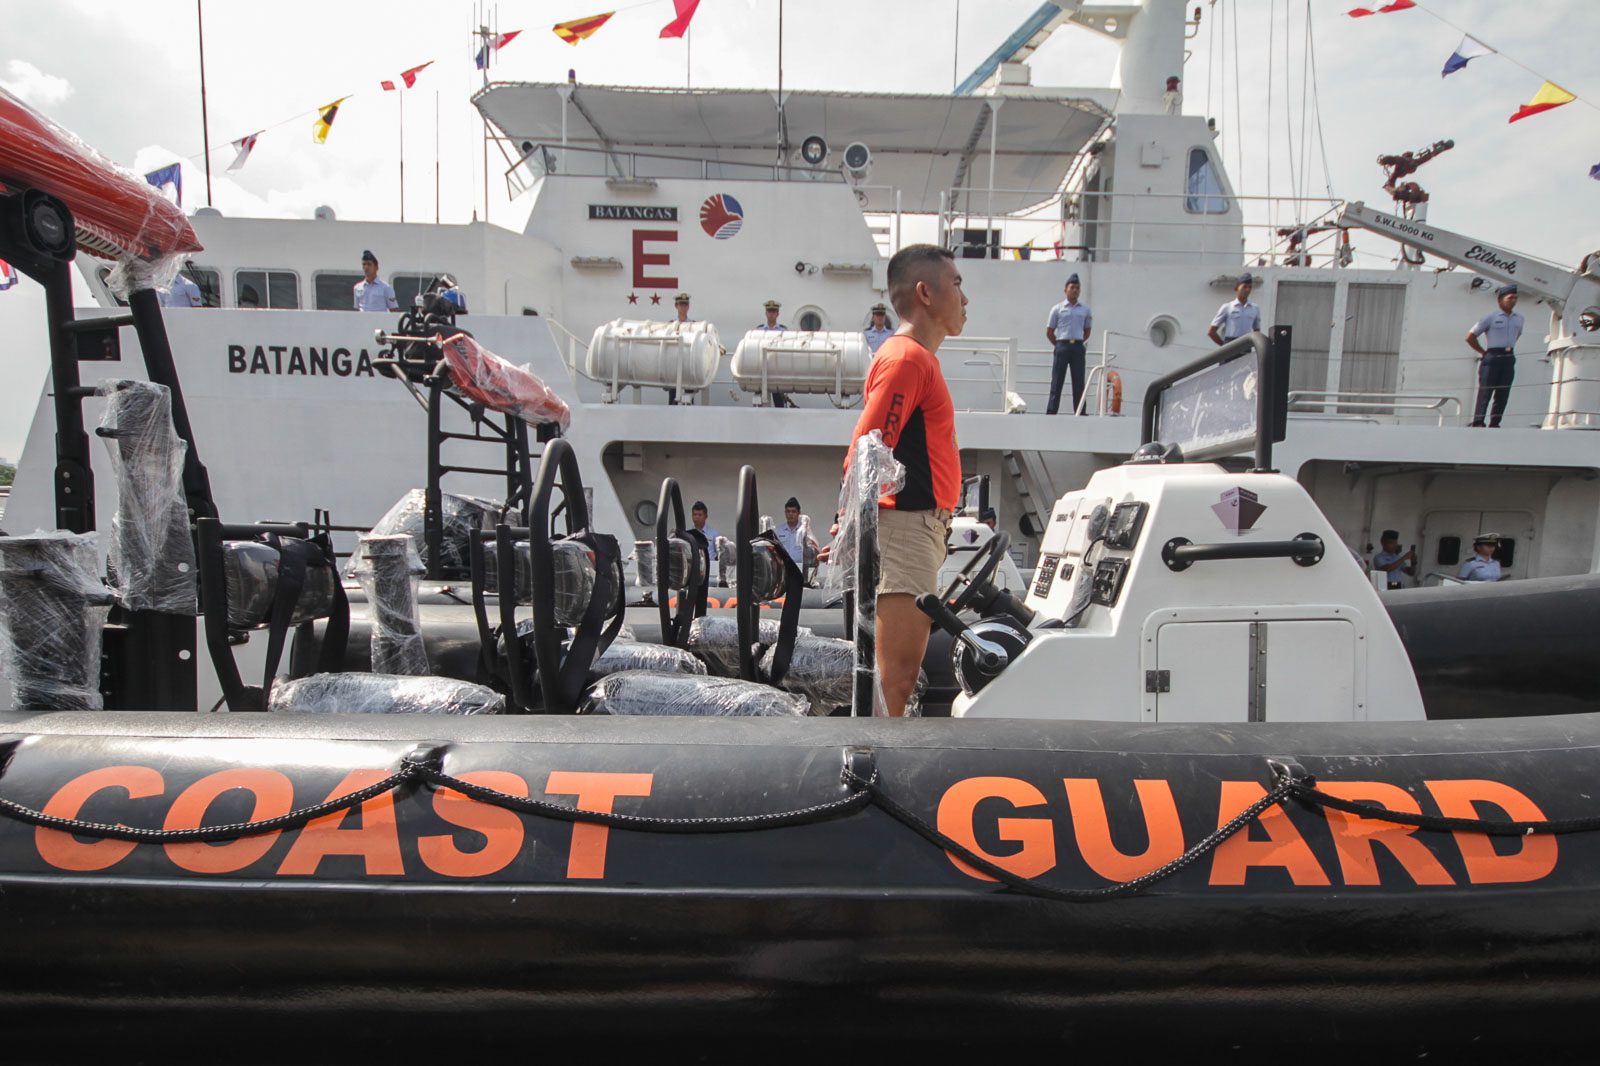 Coast Guard gets new high-speed boats, trucks to boost capabilities